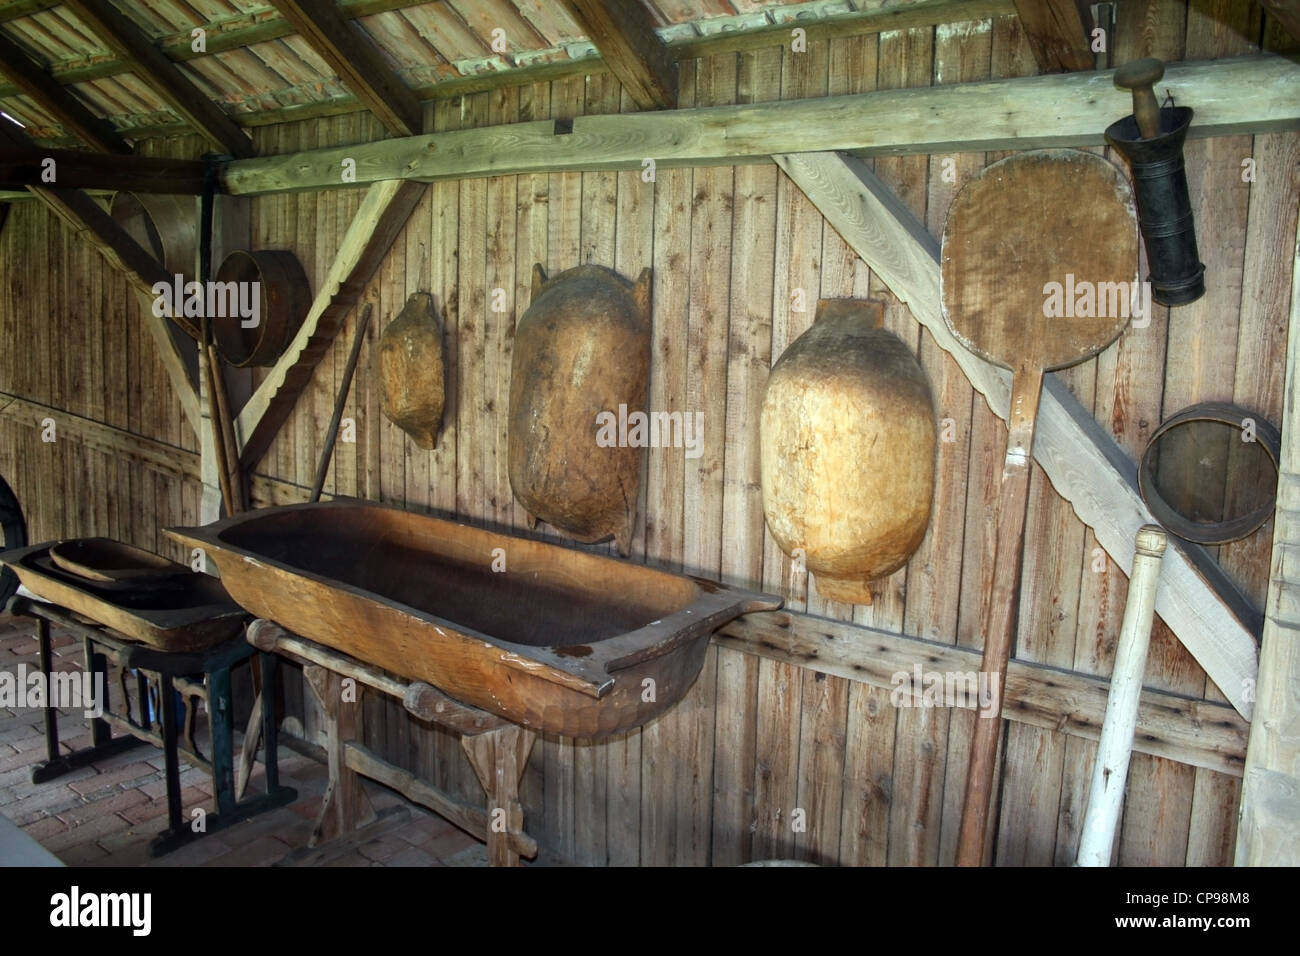 Troughs made of one piece of wood Stock Photo